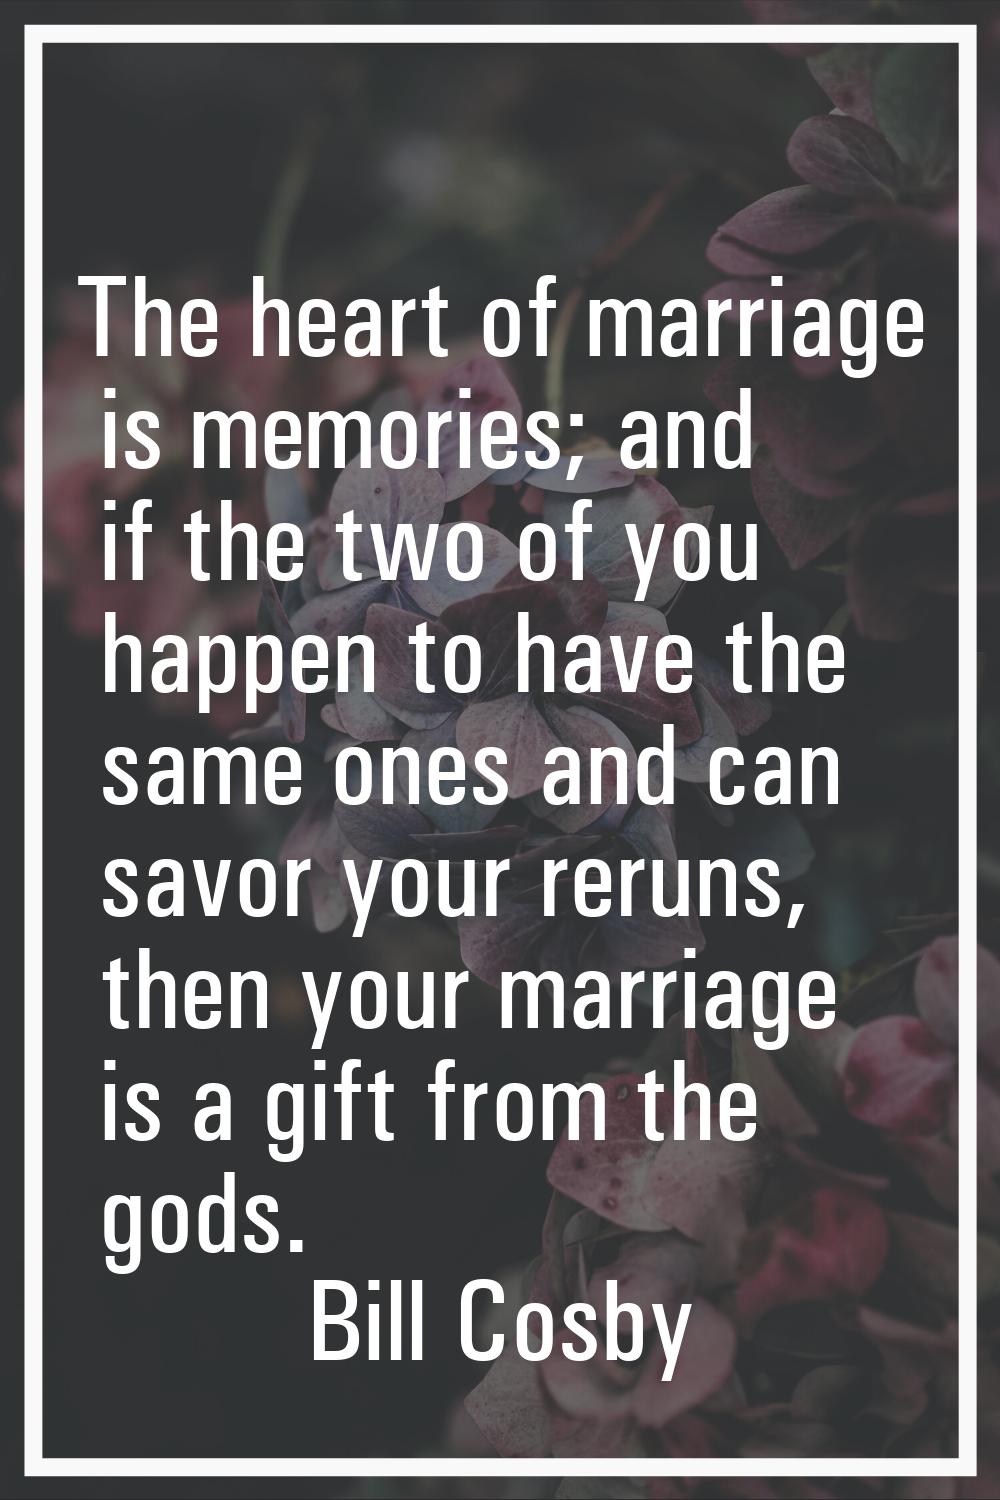 The heart of marriage is memories; and if the two of you happen to have the same ones and can savor